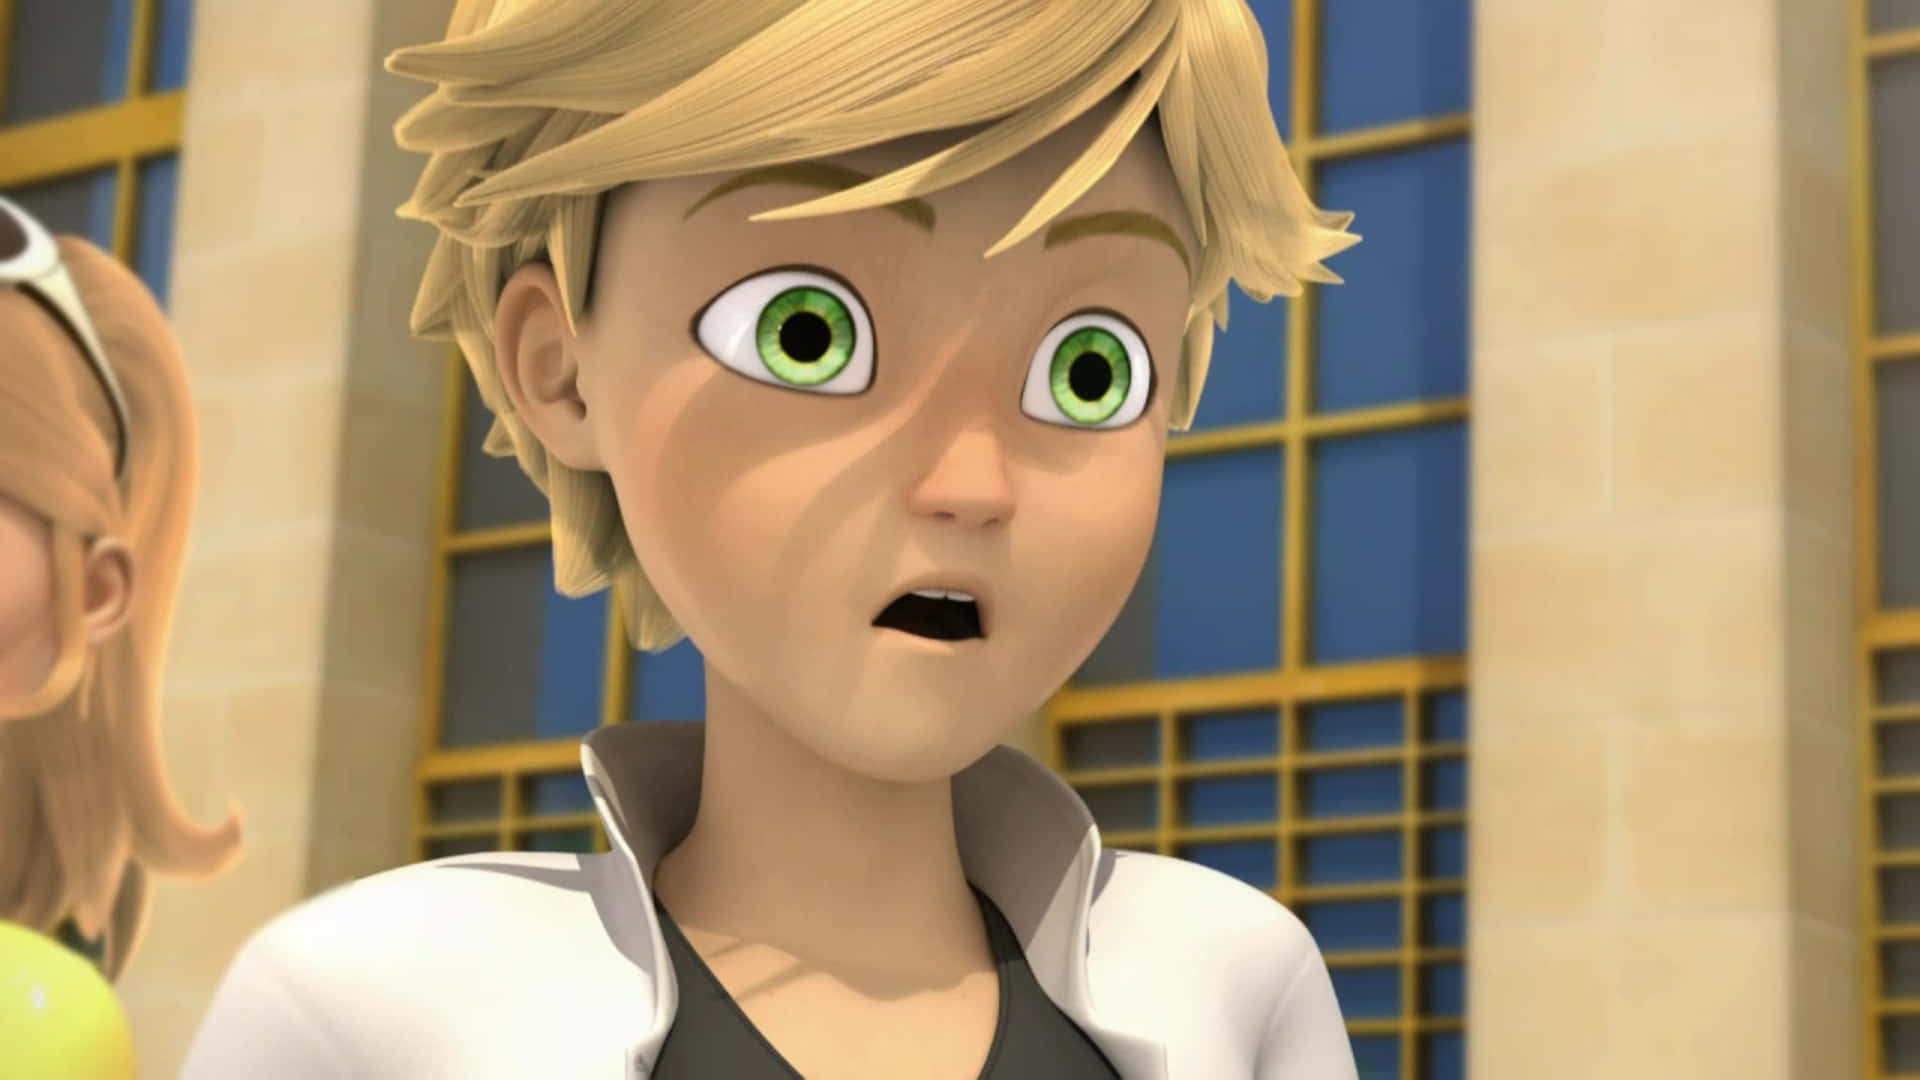 Adrien Agreste, a young teen with the powers of a superhero.